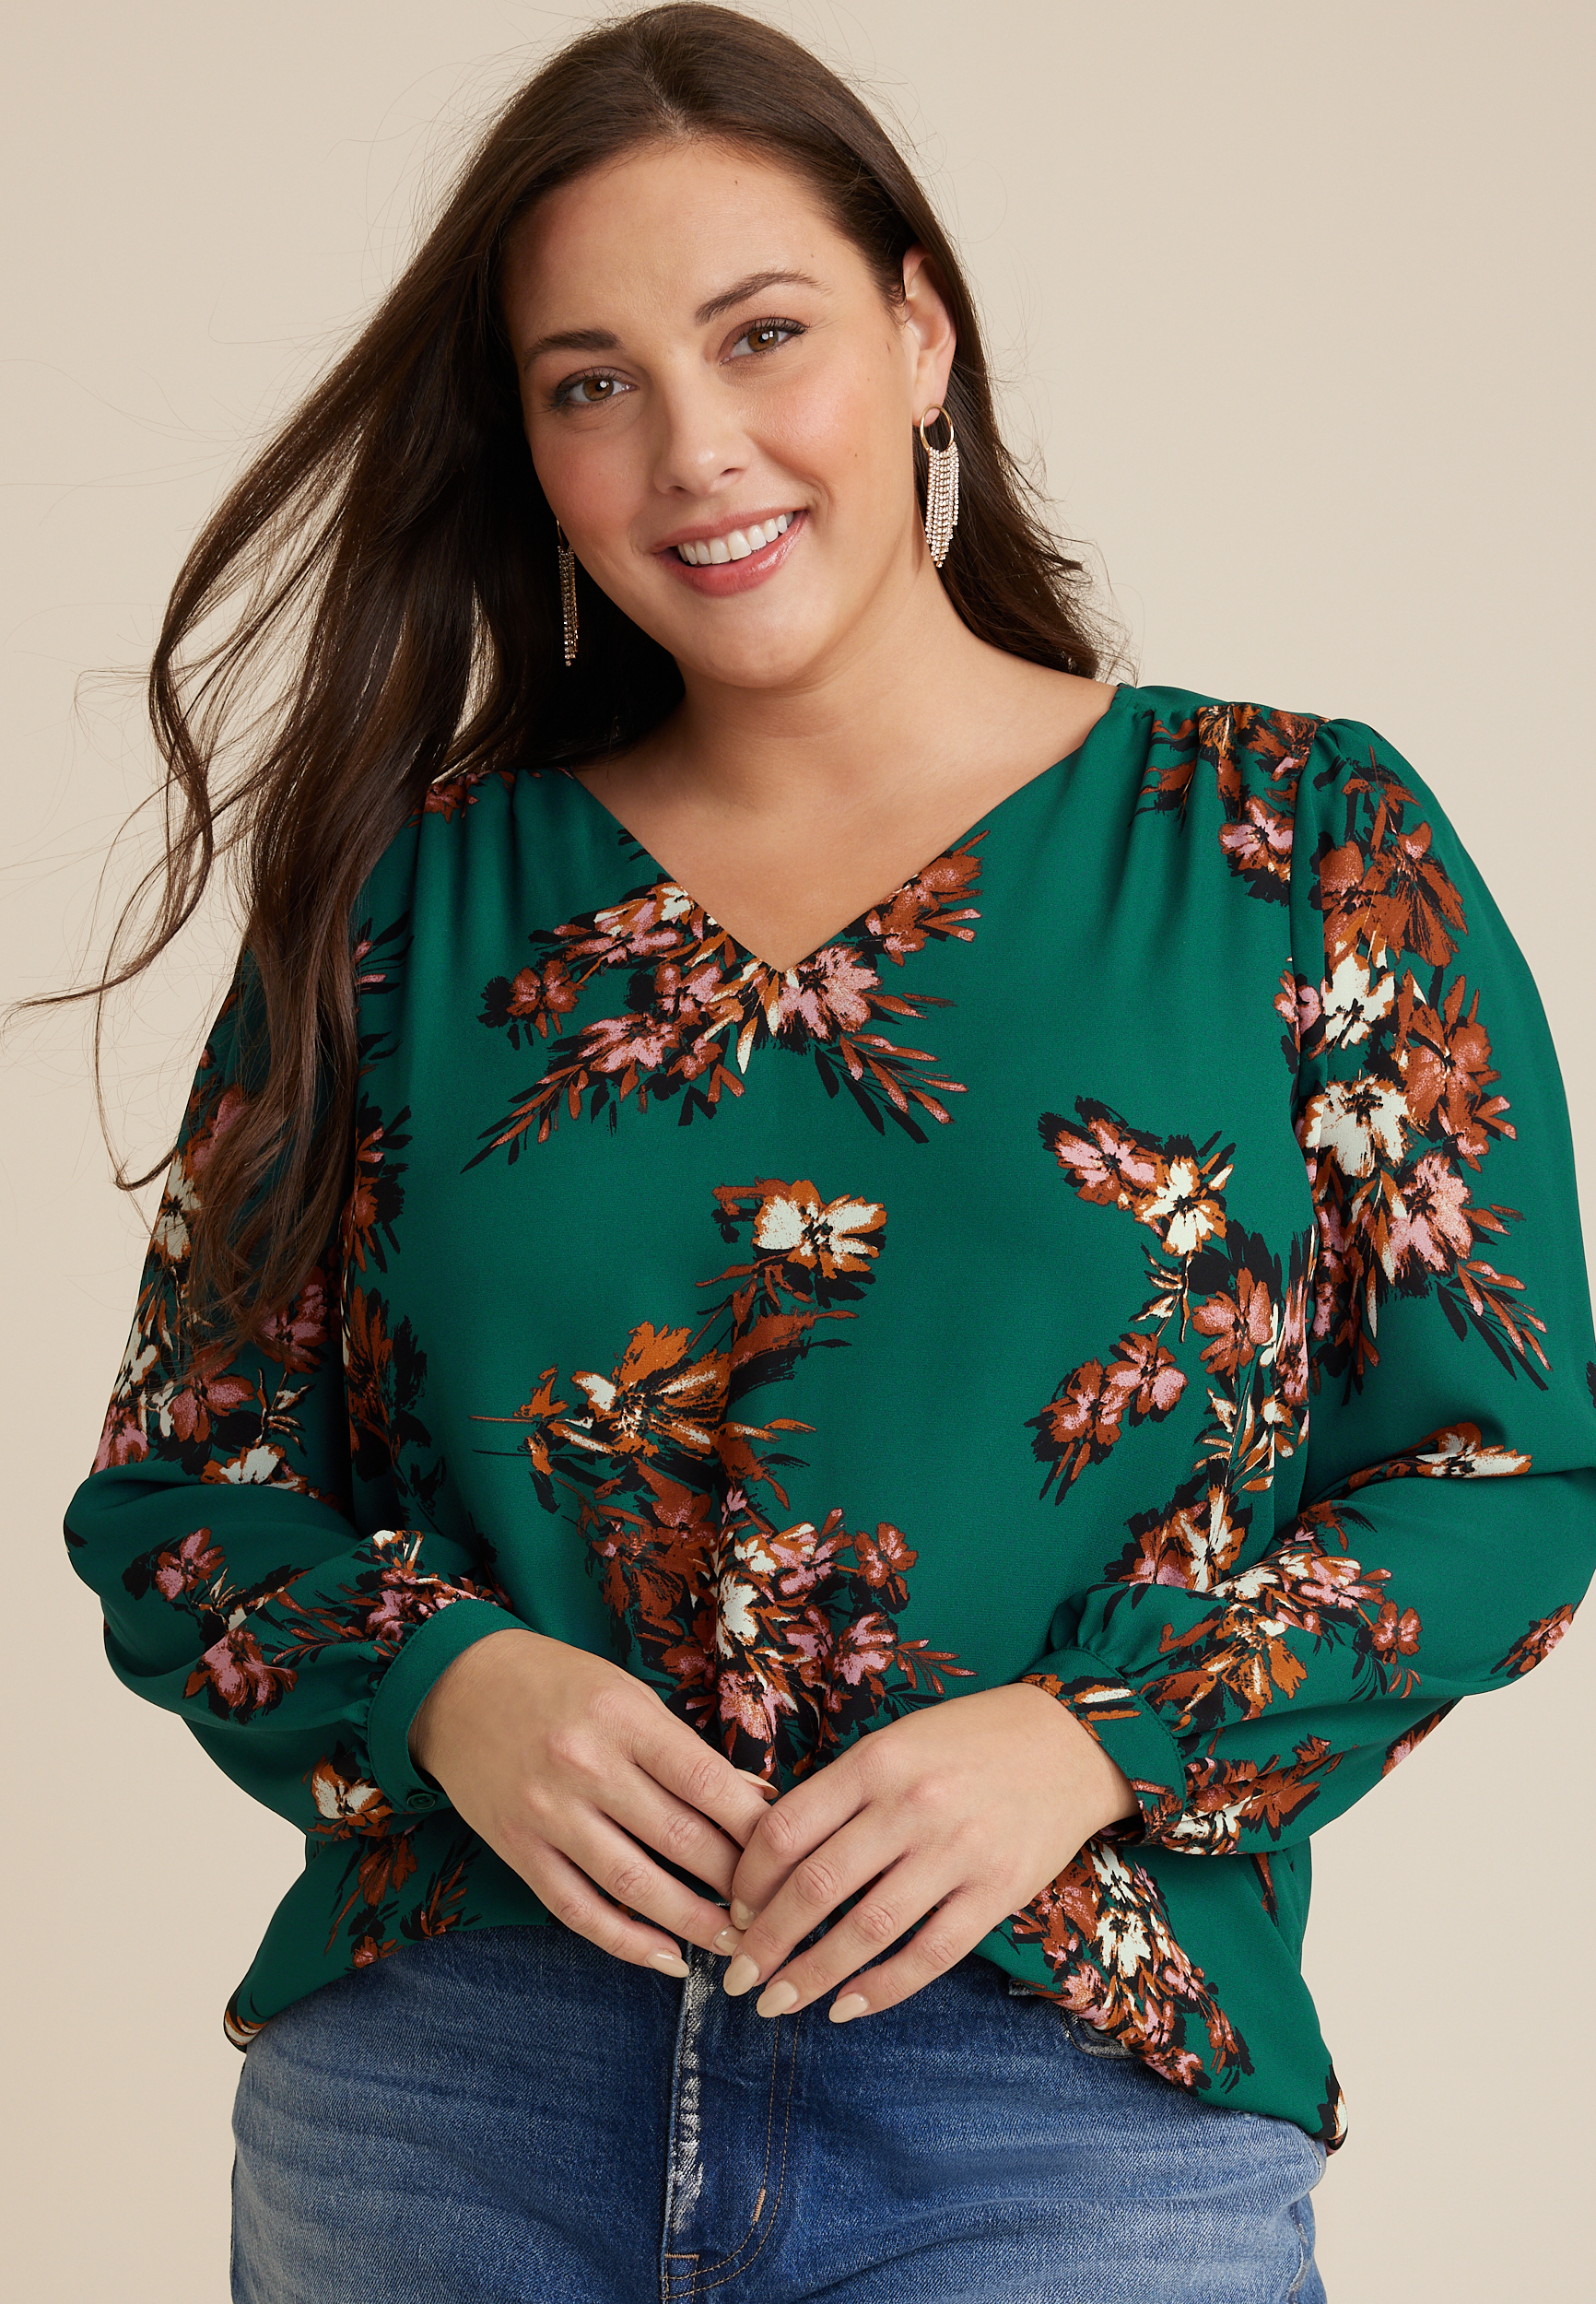 warehouse deals canada Summer Tunic Tops for Women Plus Size V